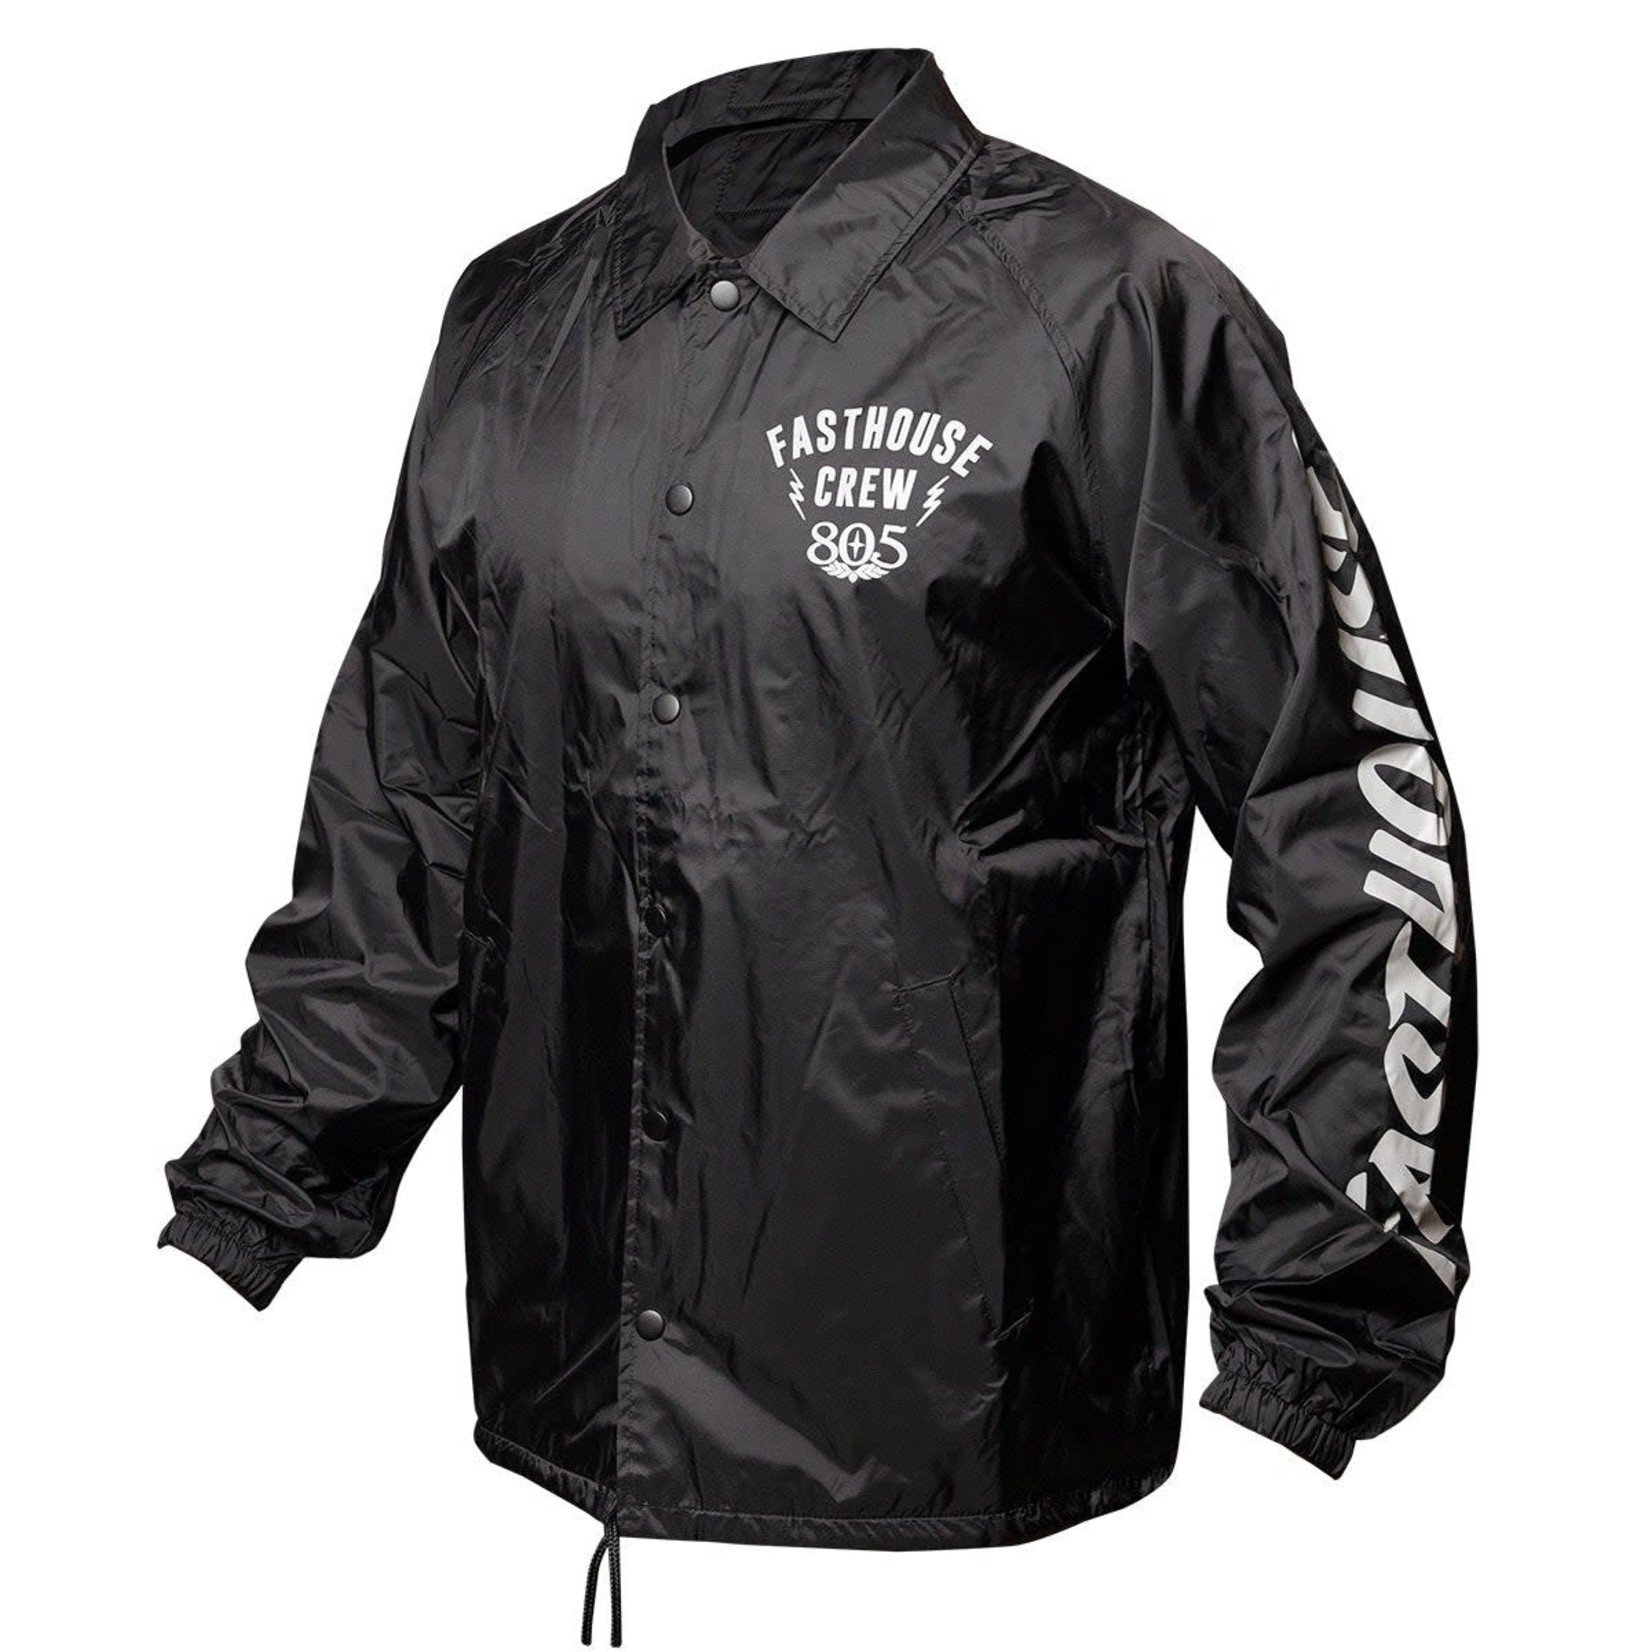 FASTHOUSE Team Collared Coaches Jacket, Black LG